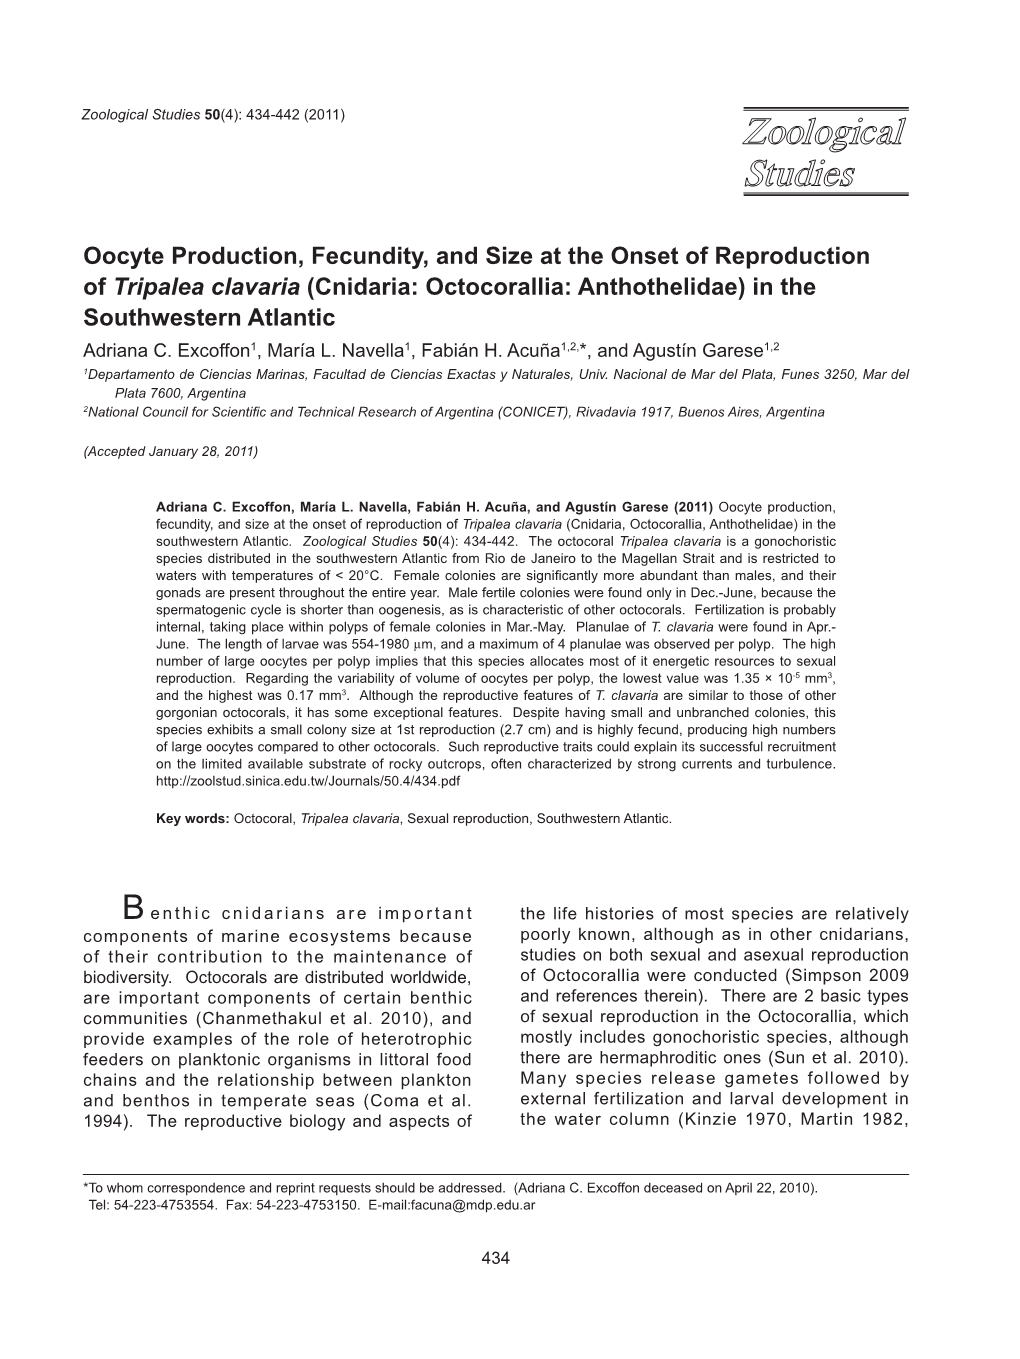 Oocyte Production, Fecundity, and Size at the Onset of Reproduction Of